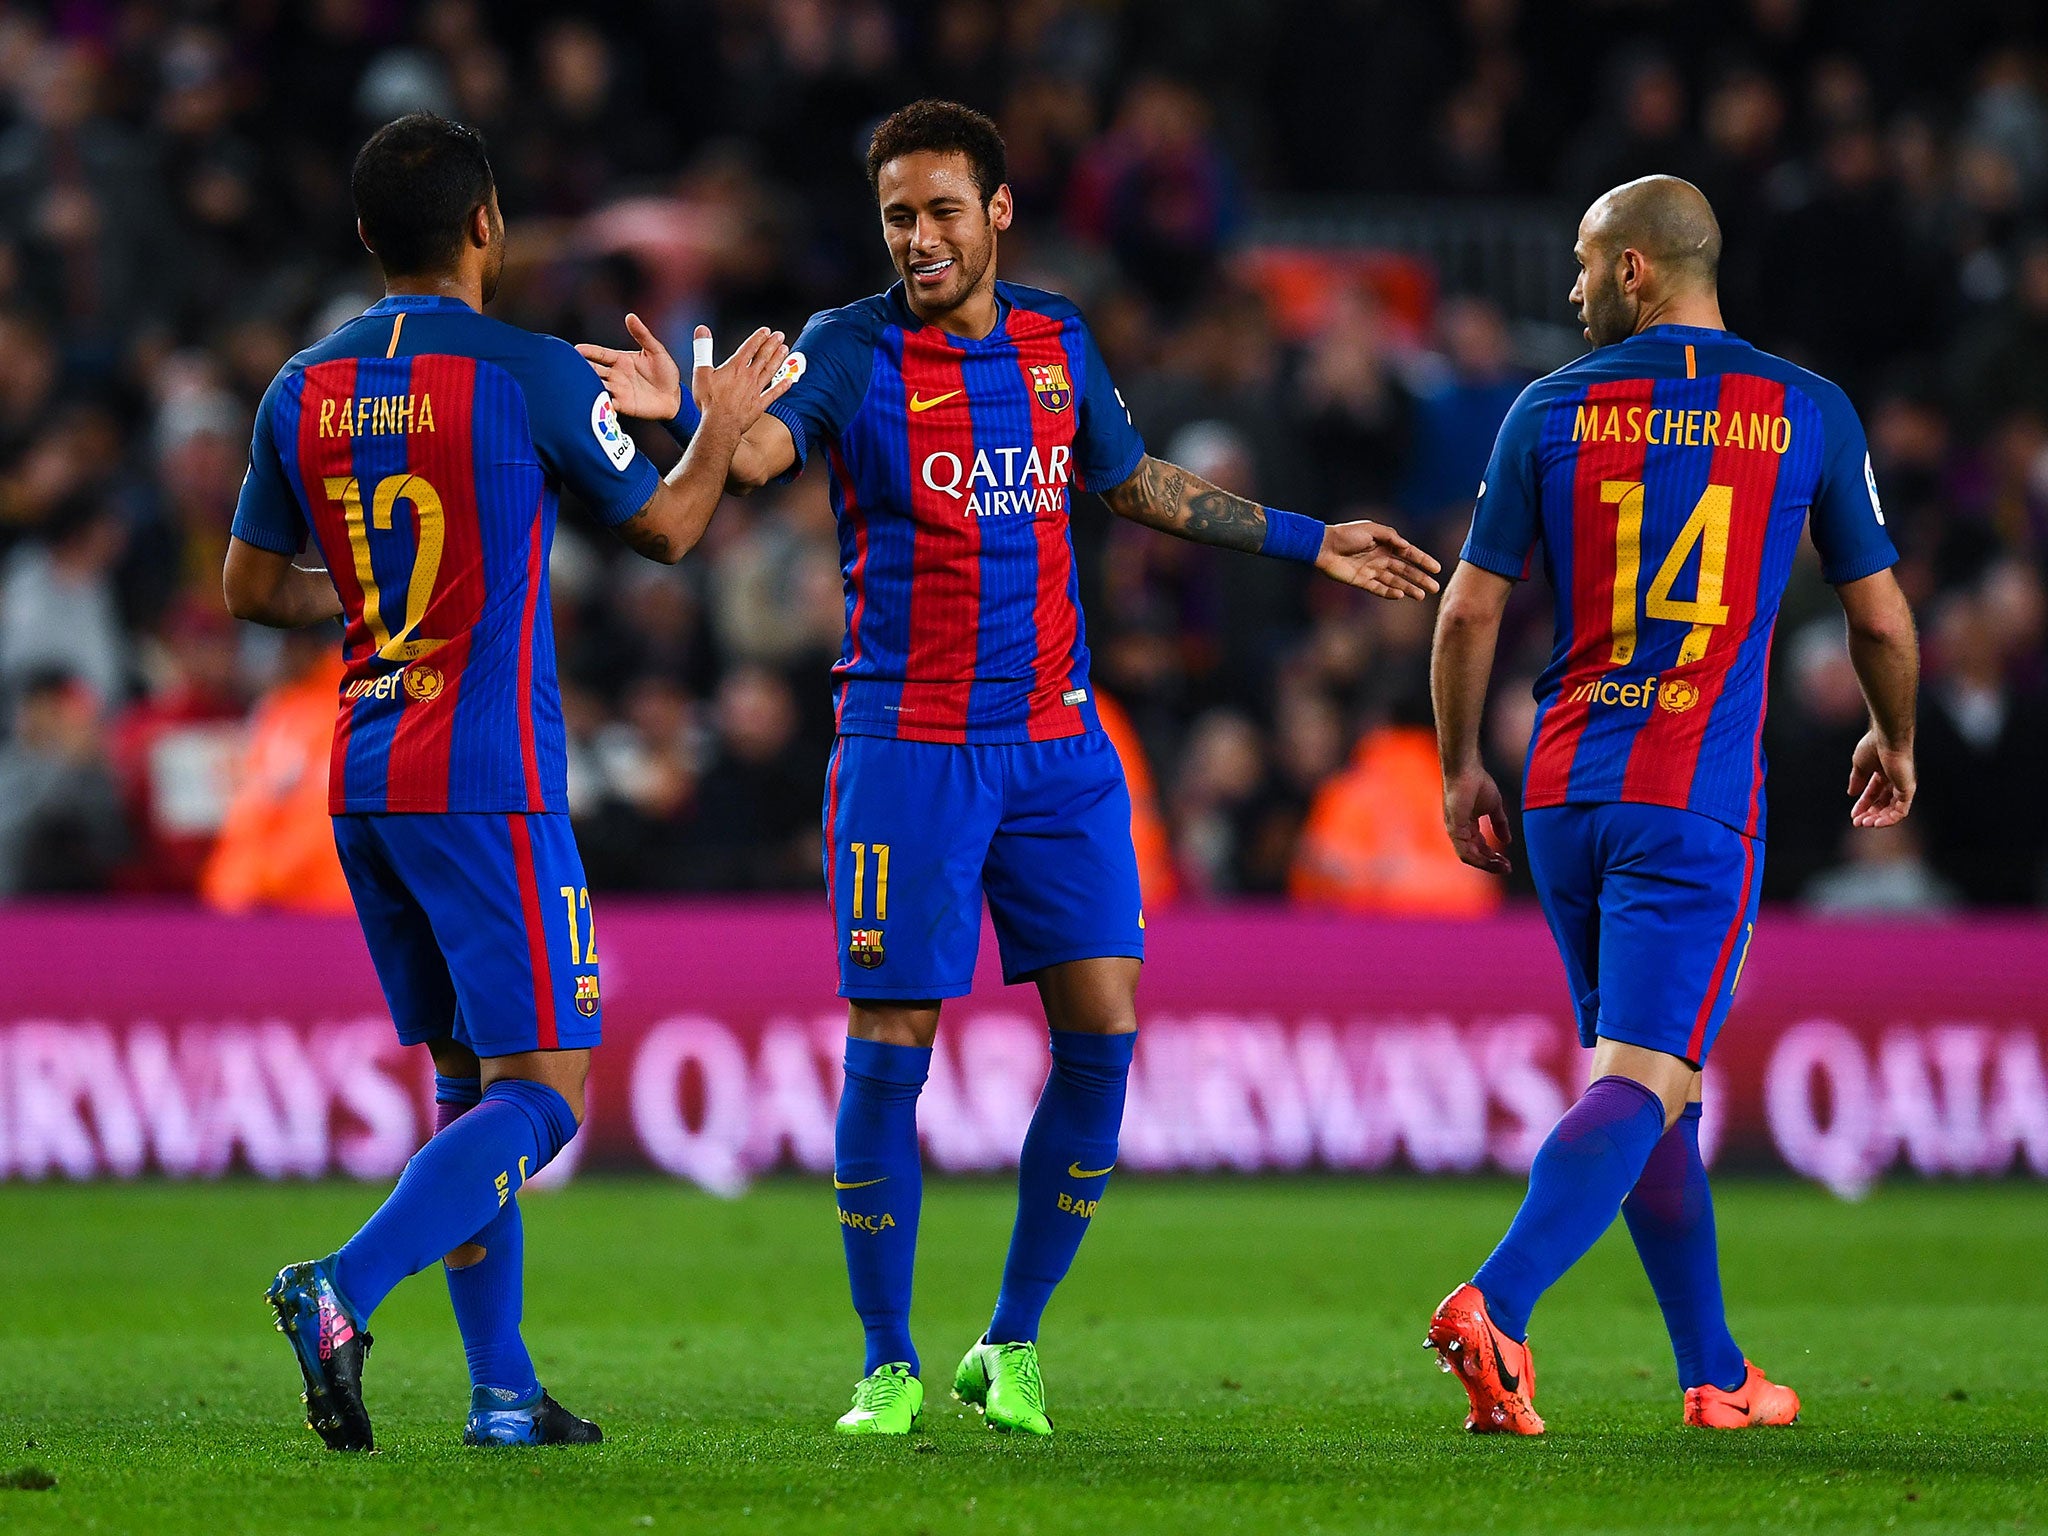 Neymar celebrates with his team mates after scoring his team's fifth goal